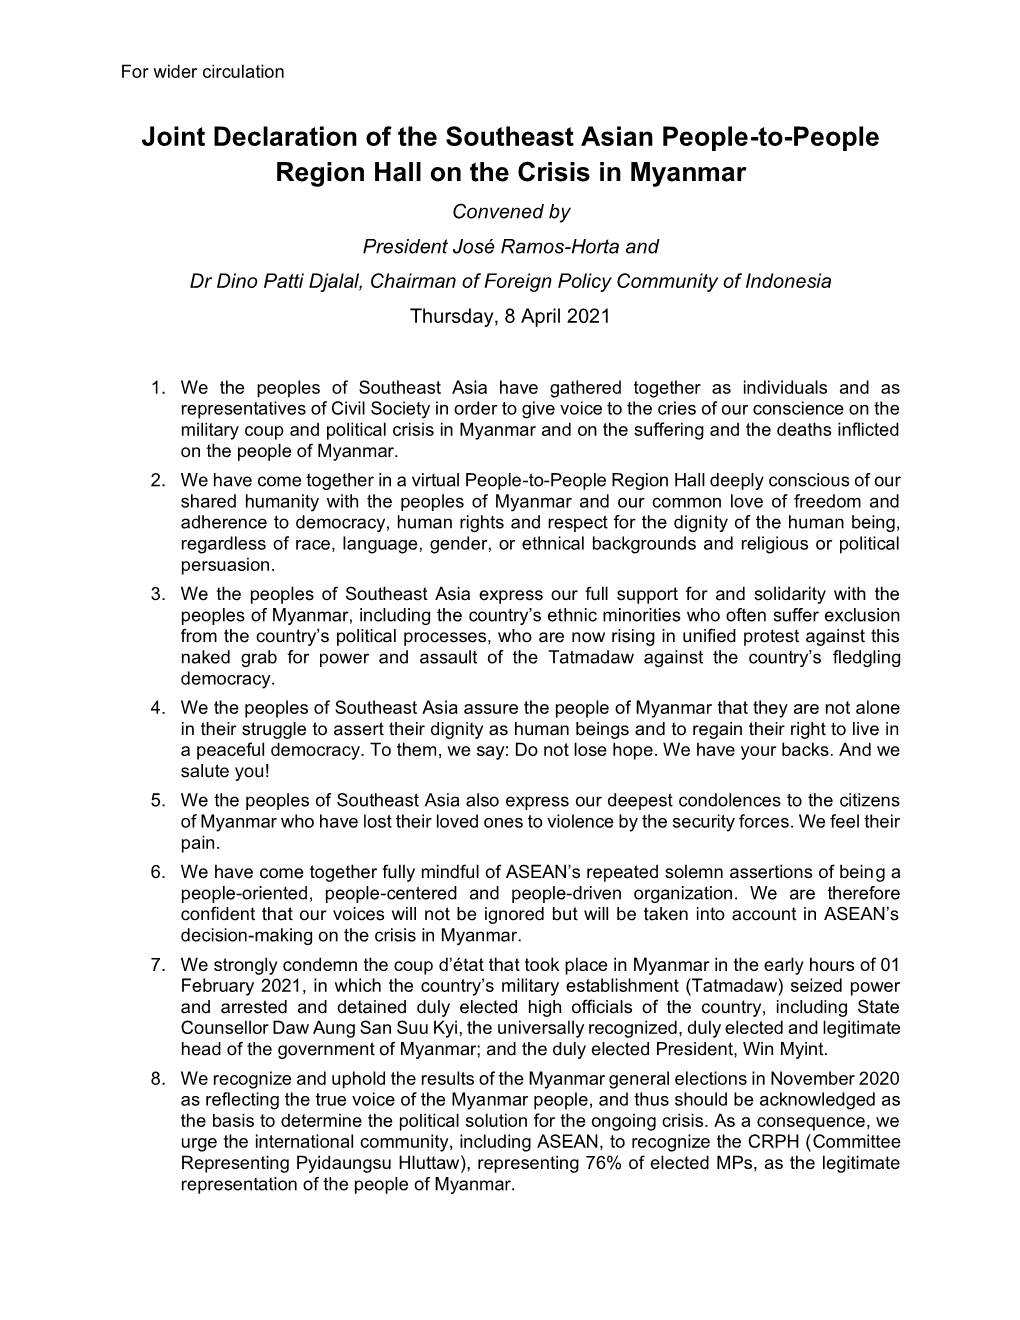 Joint Declaration of the Southeast Asian People-To-People Region Hall on the Crisis in Myanmar